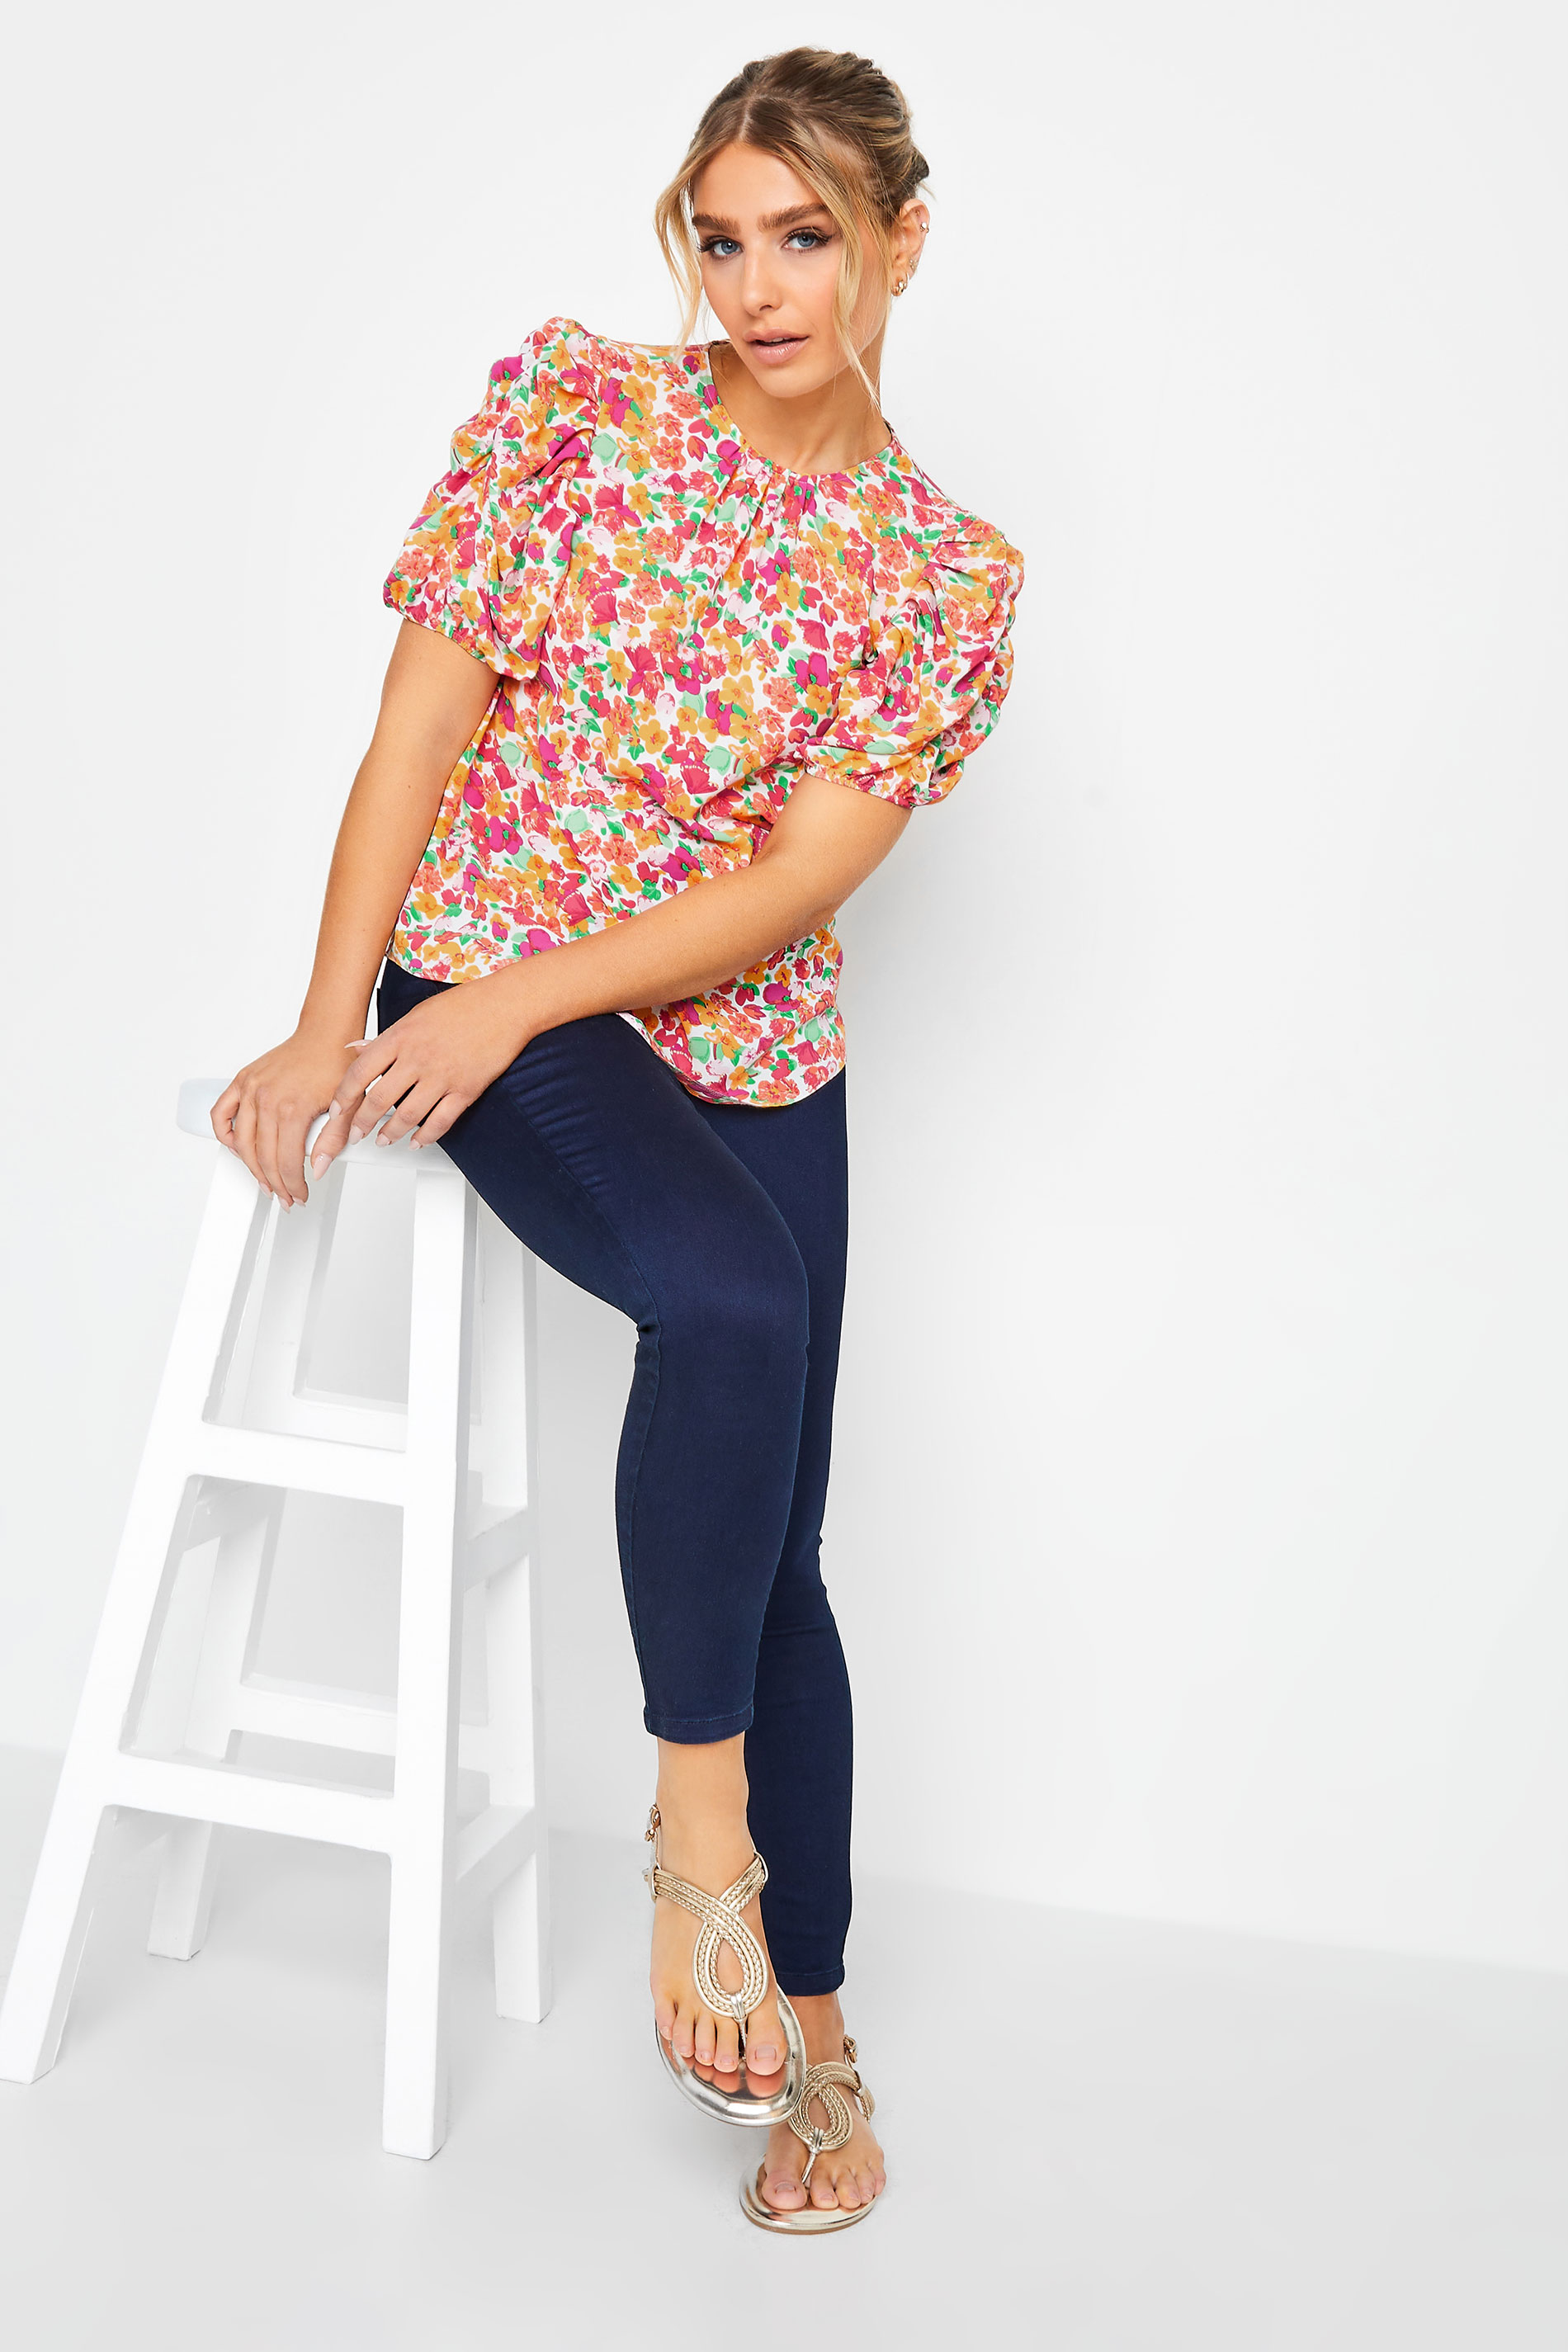 M&Co White & Pink Floral Print Puff Sleeve Blouse | M&Co  2